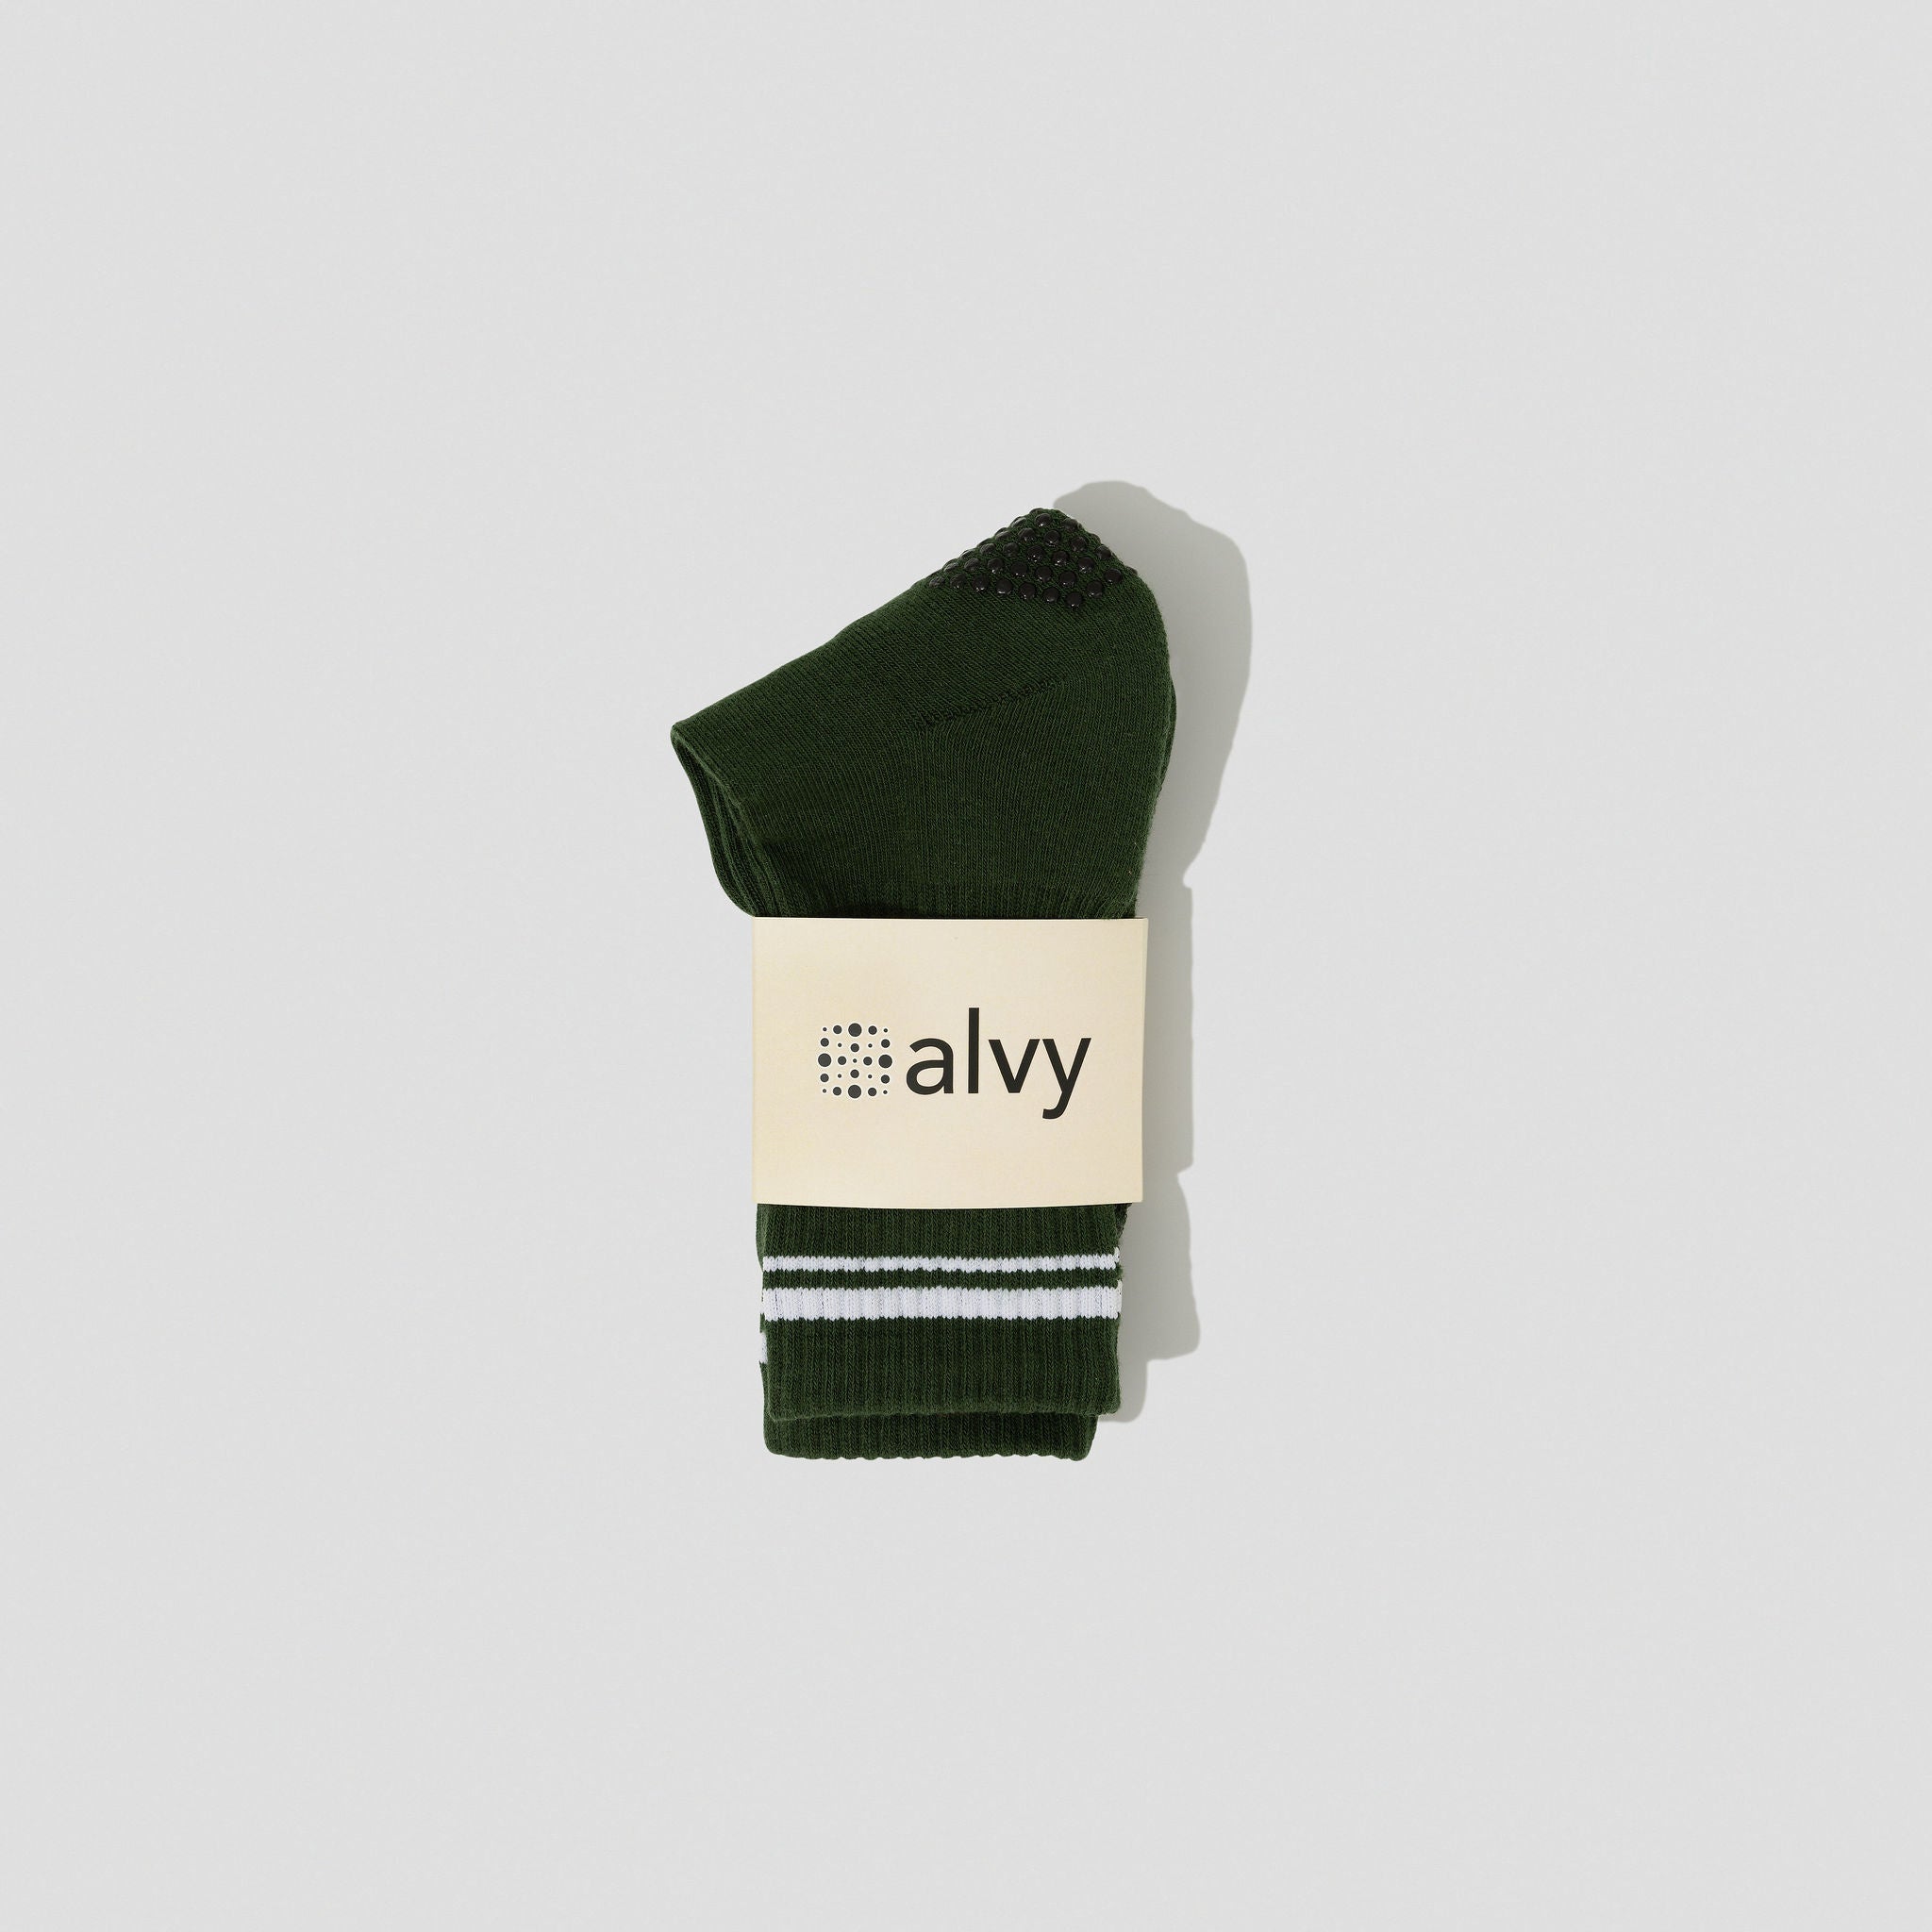 Alvy crew forest green socks packaged